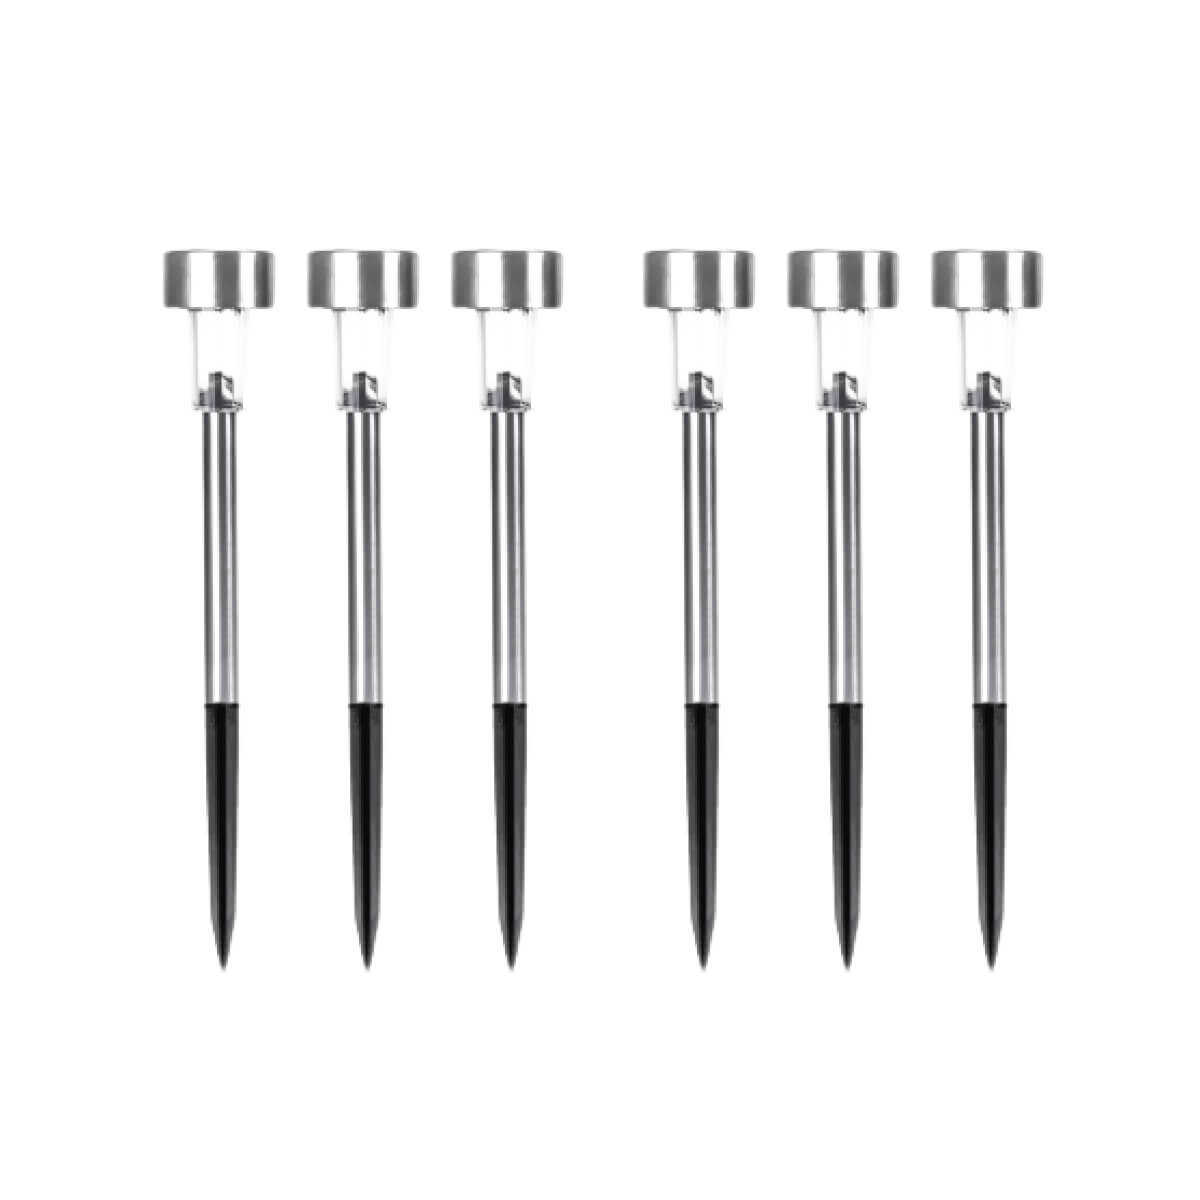 View Pack of 6 Melbourne LED Solar Stainless Steel Stake Light information